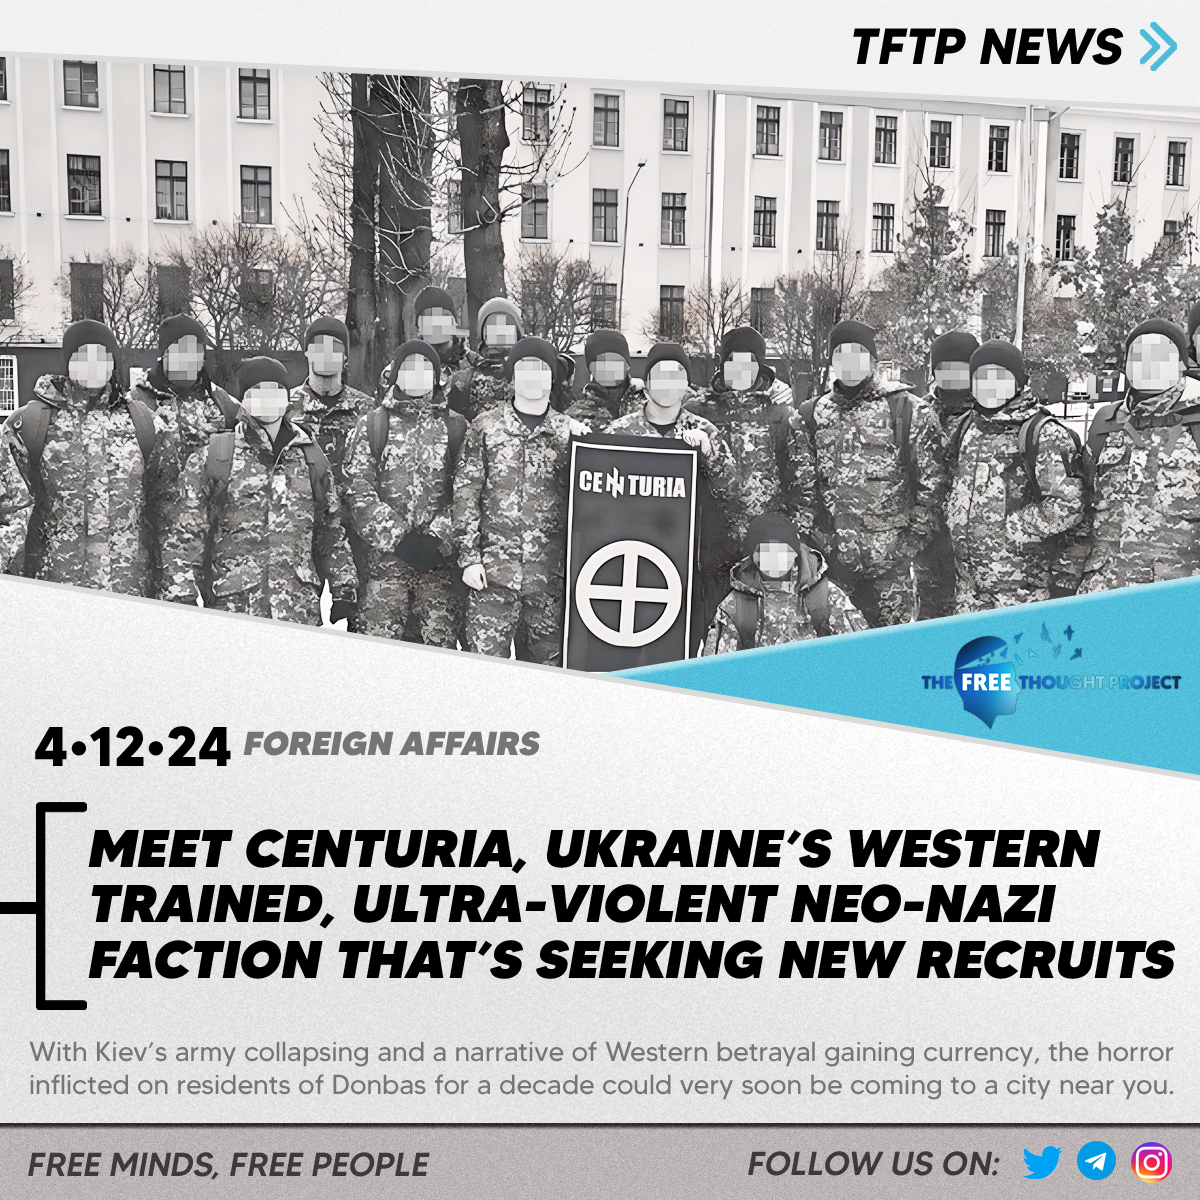 A uniquely Ukrainian strain of Neo-Nazism is spreading throughout Europe, which openly advocates violence against minorities while seeking new recruits. Read More: thefreethoughtproject.com/foreign-affair… #TheFreeThoughtProject #TFTP